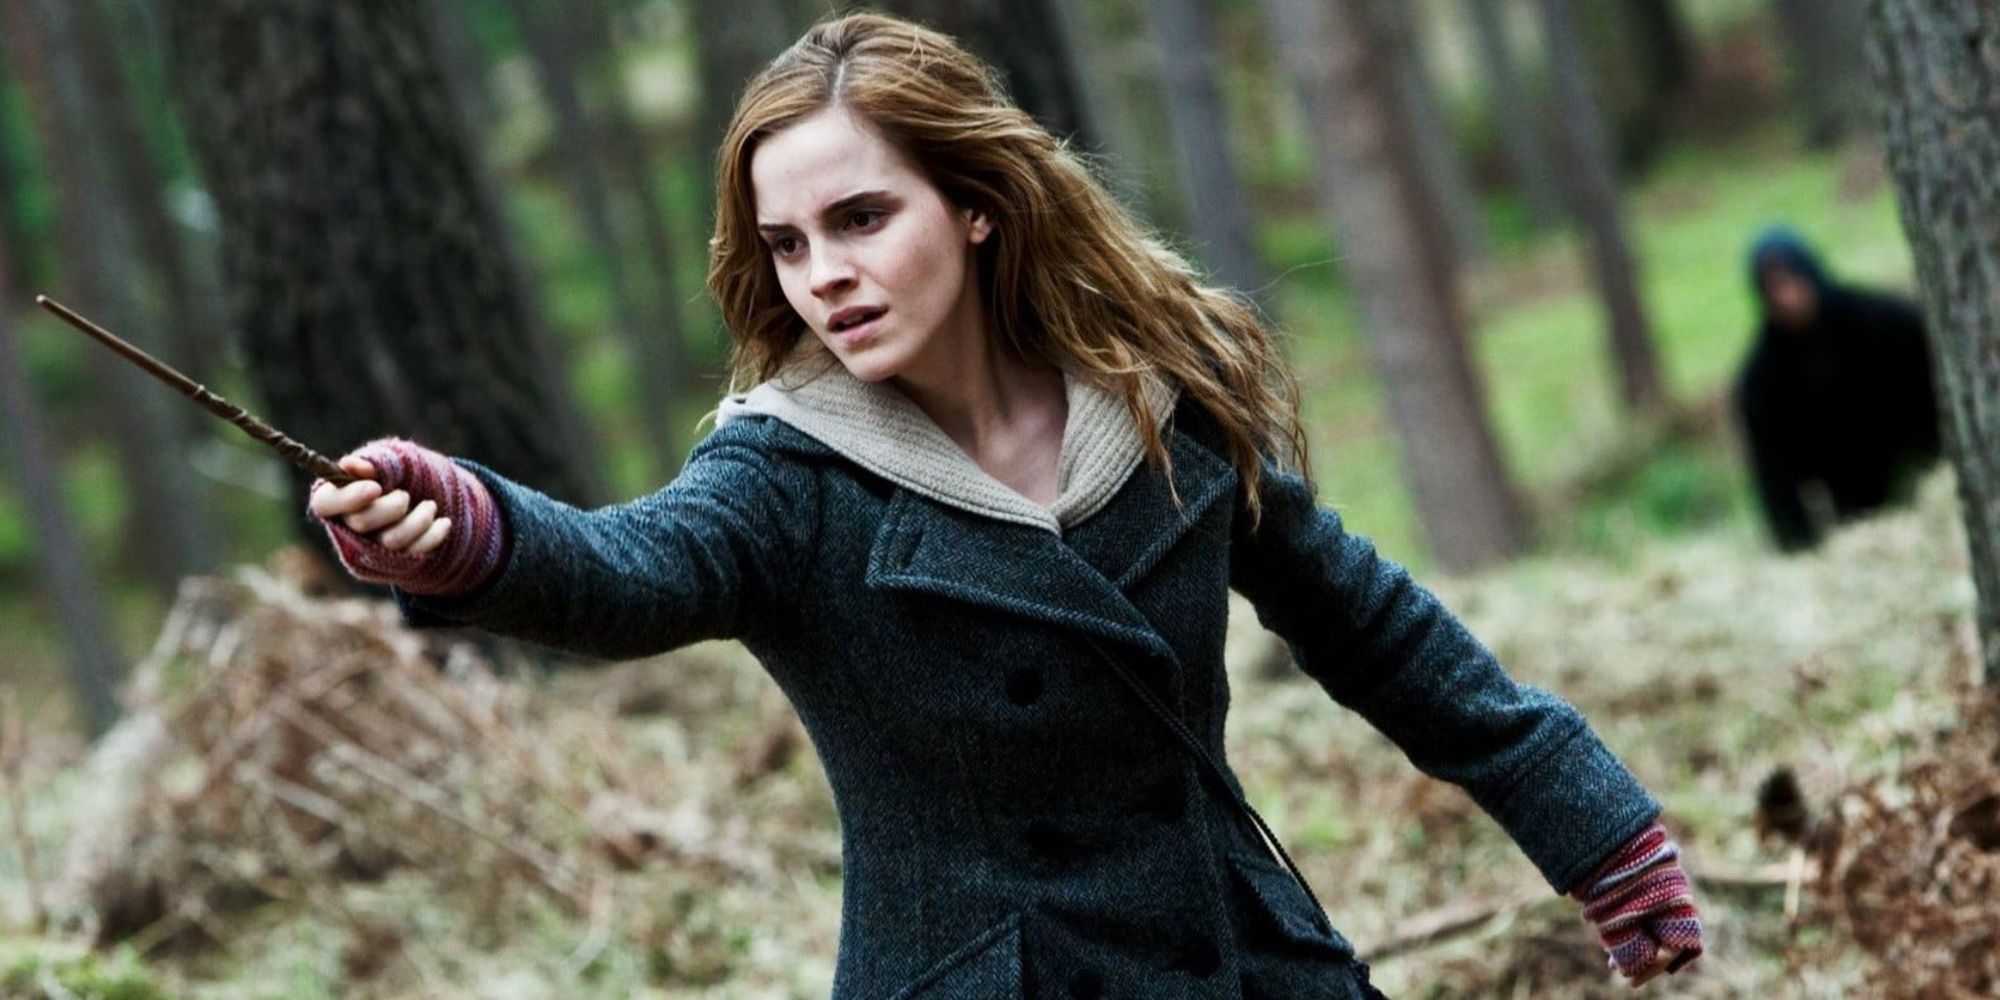 Hermione fends off a group of snatchers in Harry Potter and the Deathly Hallows Part 1